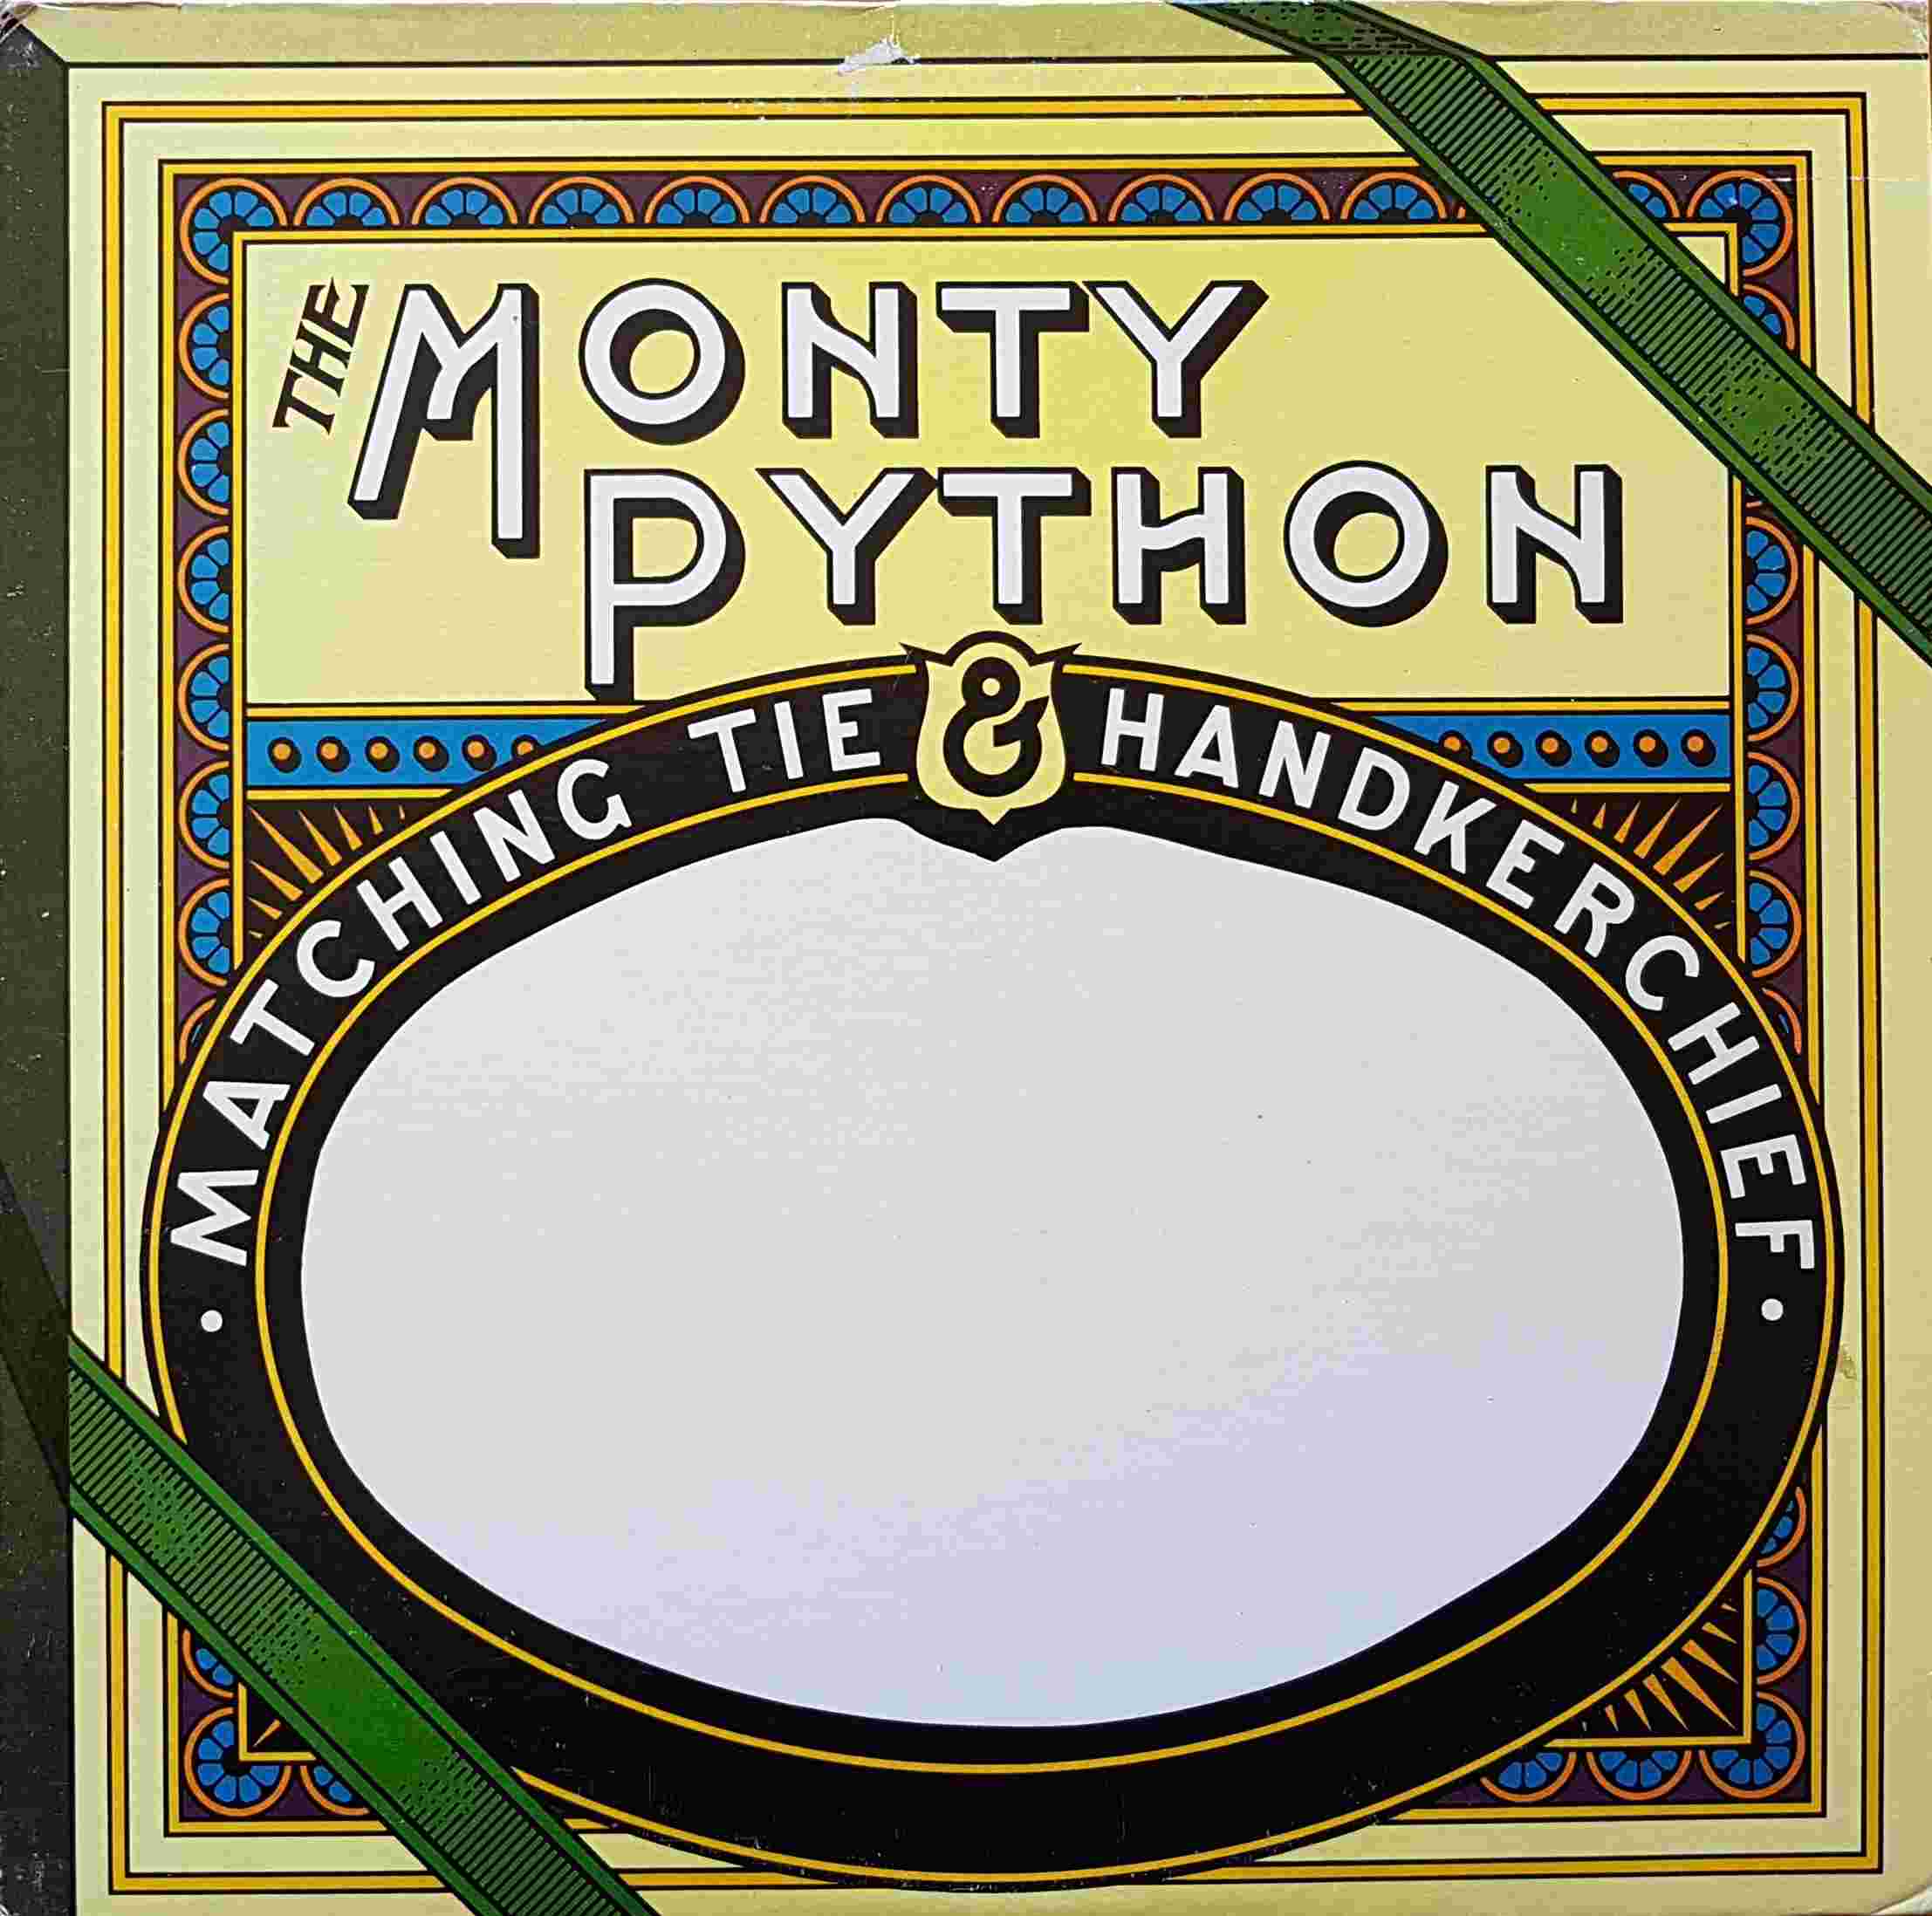 Picture of ALB6 - 8357 Matching tie and handkerchief - US import by artist Monty Python from the BBC albums - Records and Tapes library